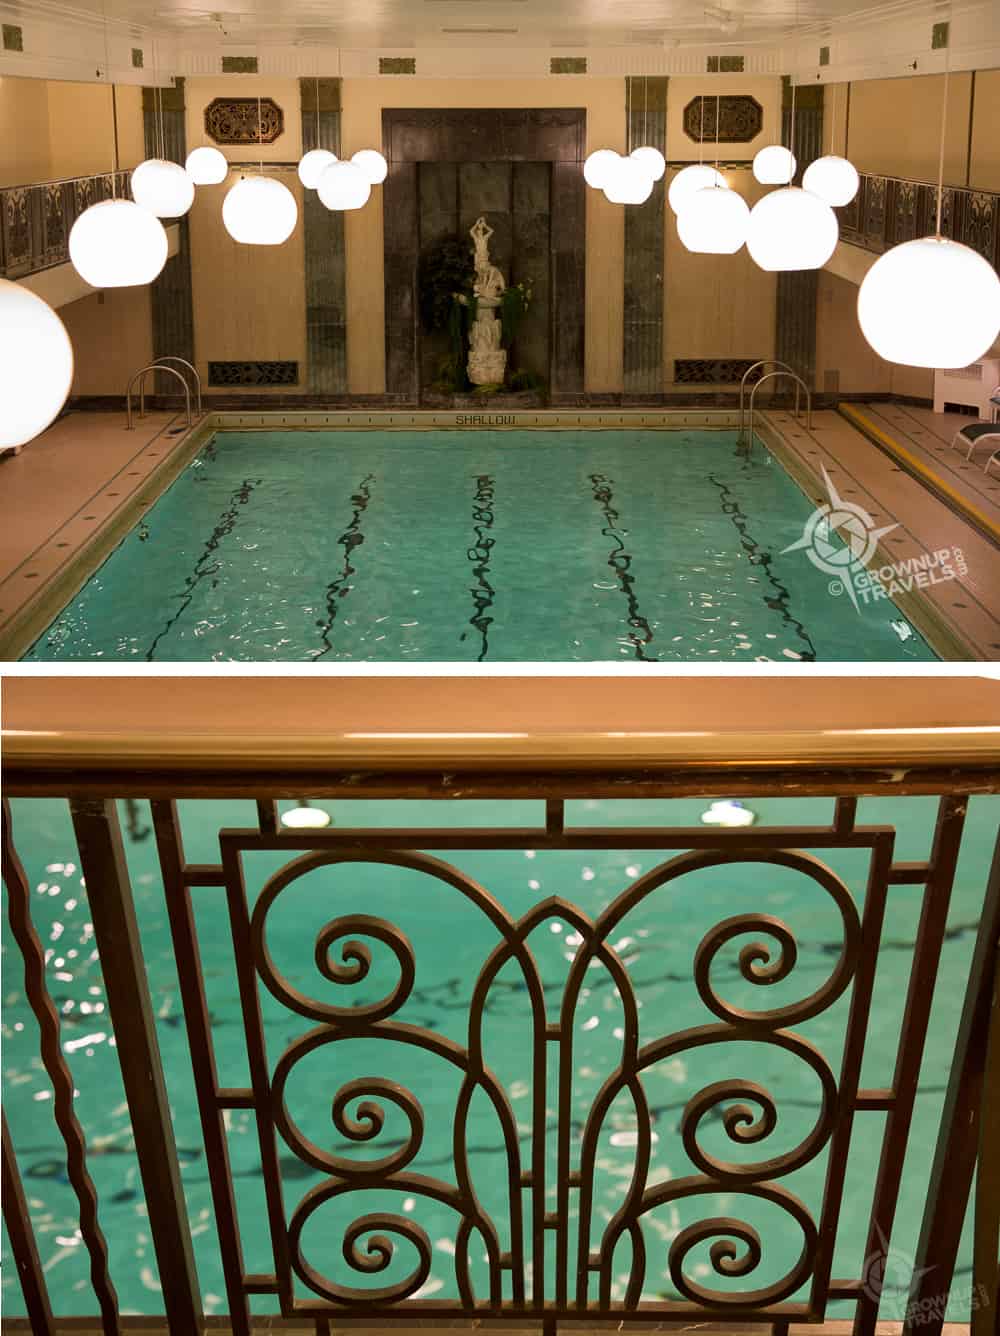 Art deco pool at Chateau Laurier